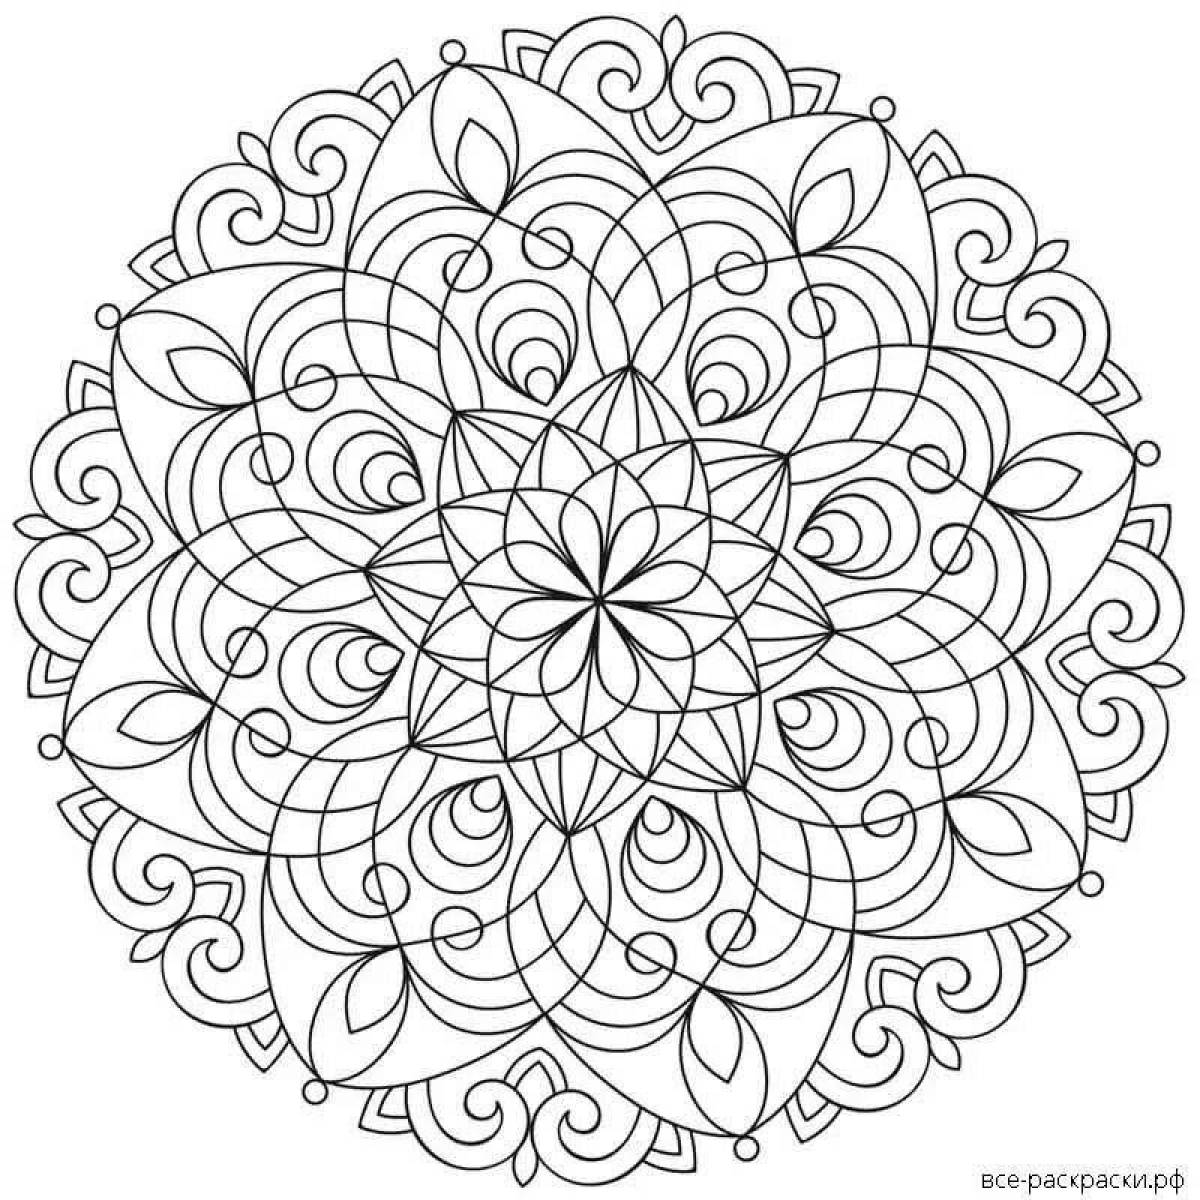 Delightful coloring flower of life